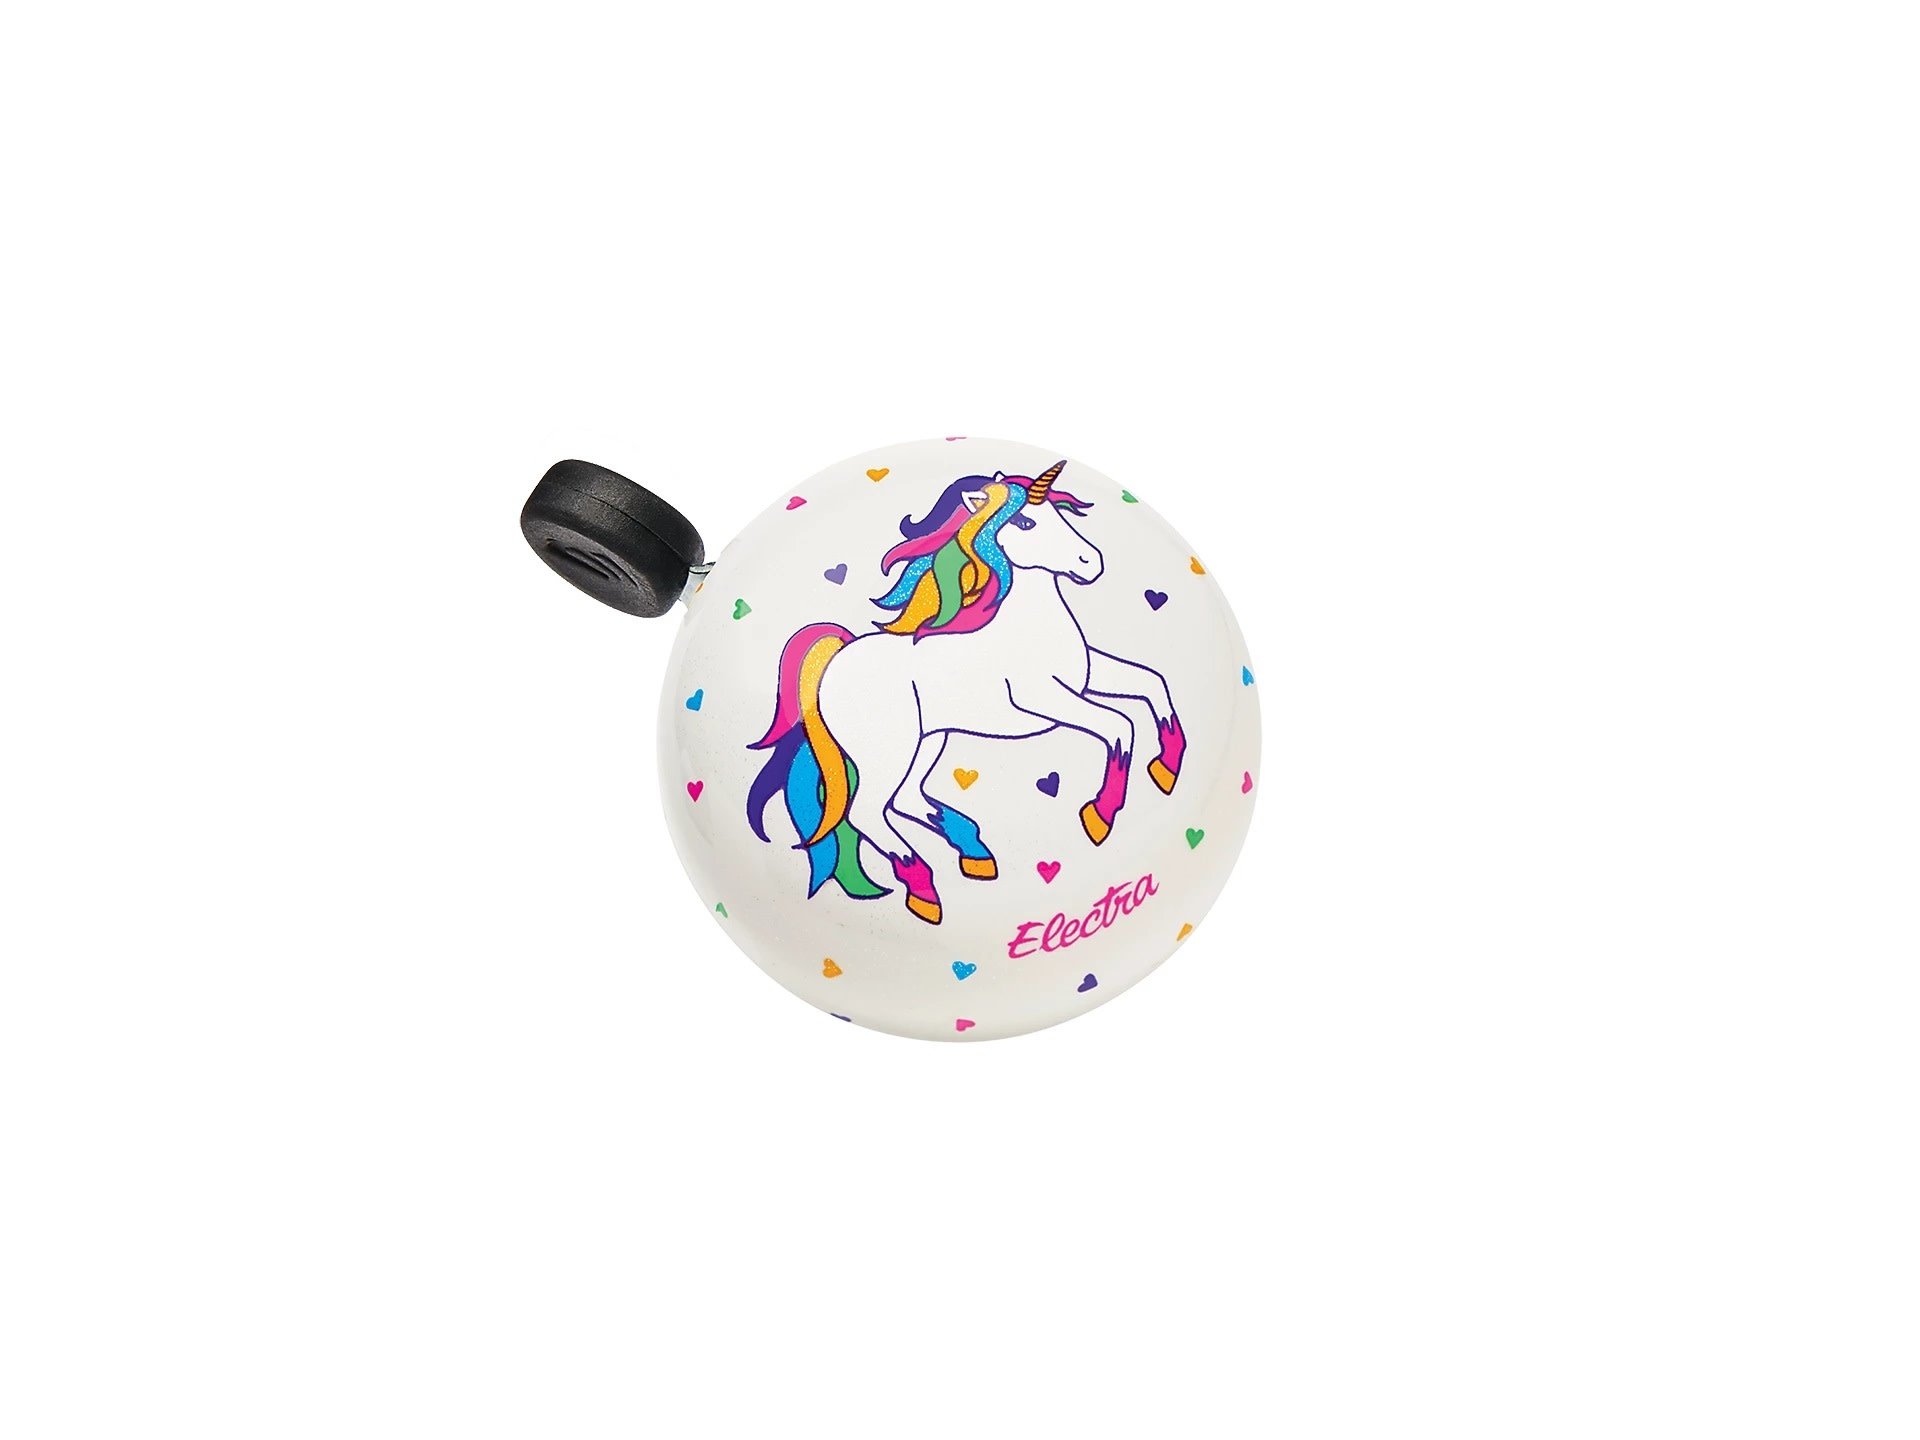 Electra Bell Electra Domed Ringer Unicorn